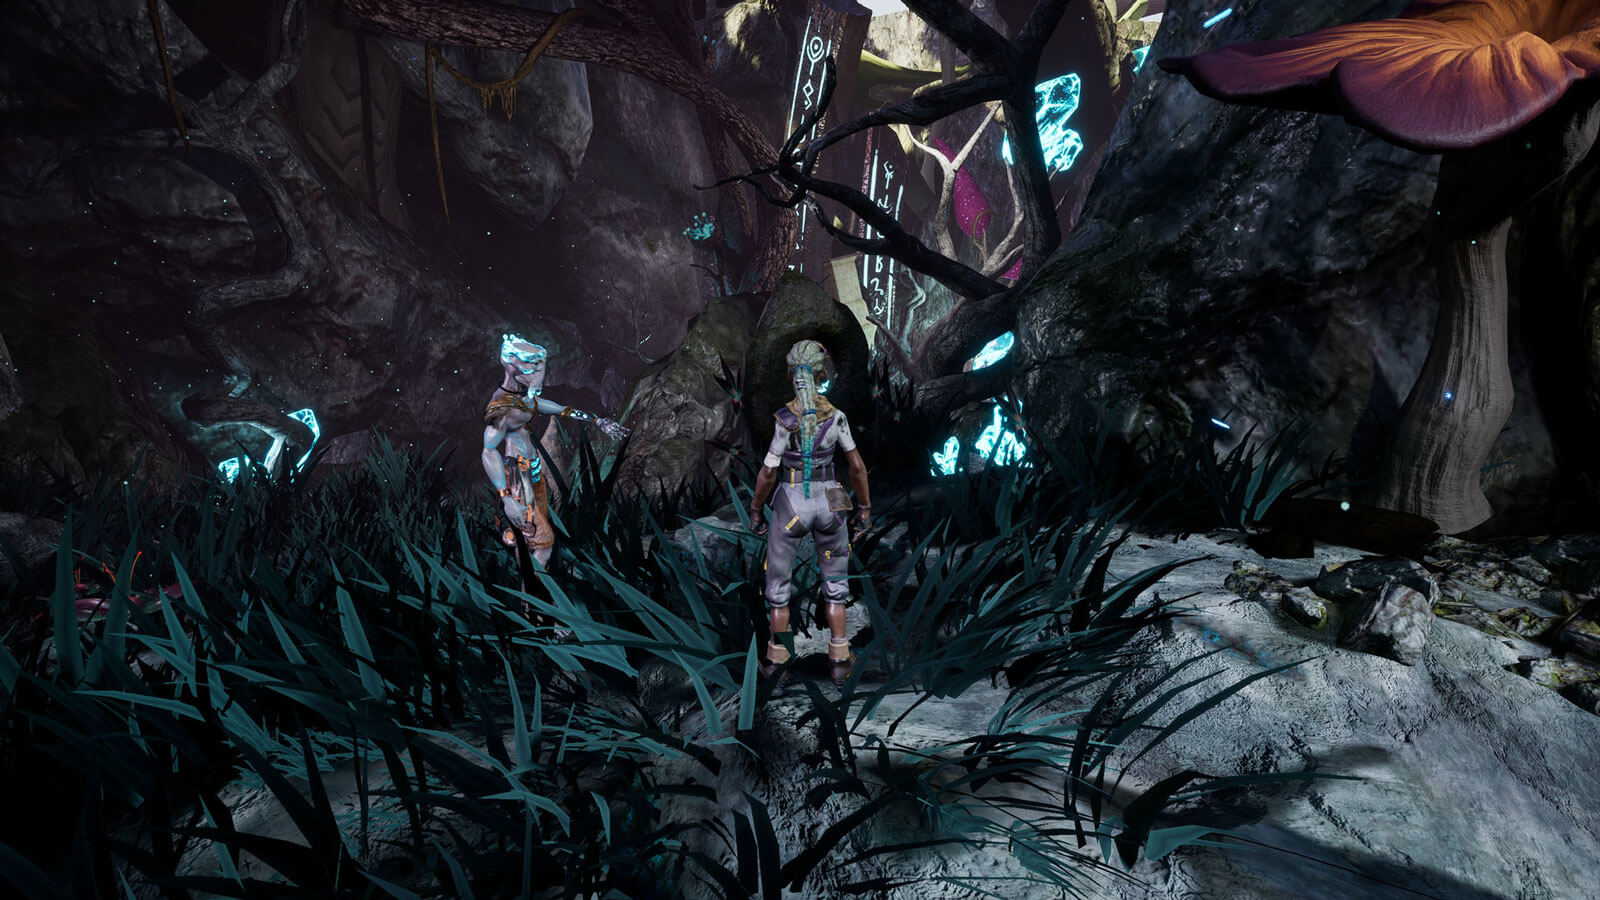 Woman and alien companion stand before a natural passageway with ruins in the background